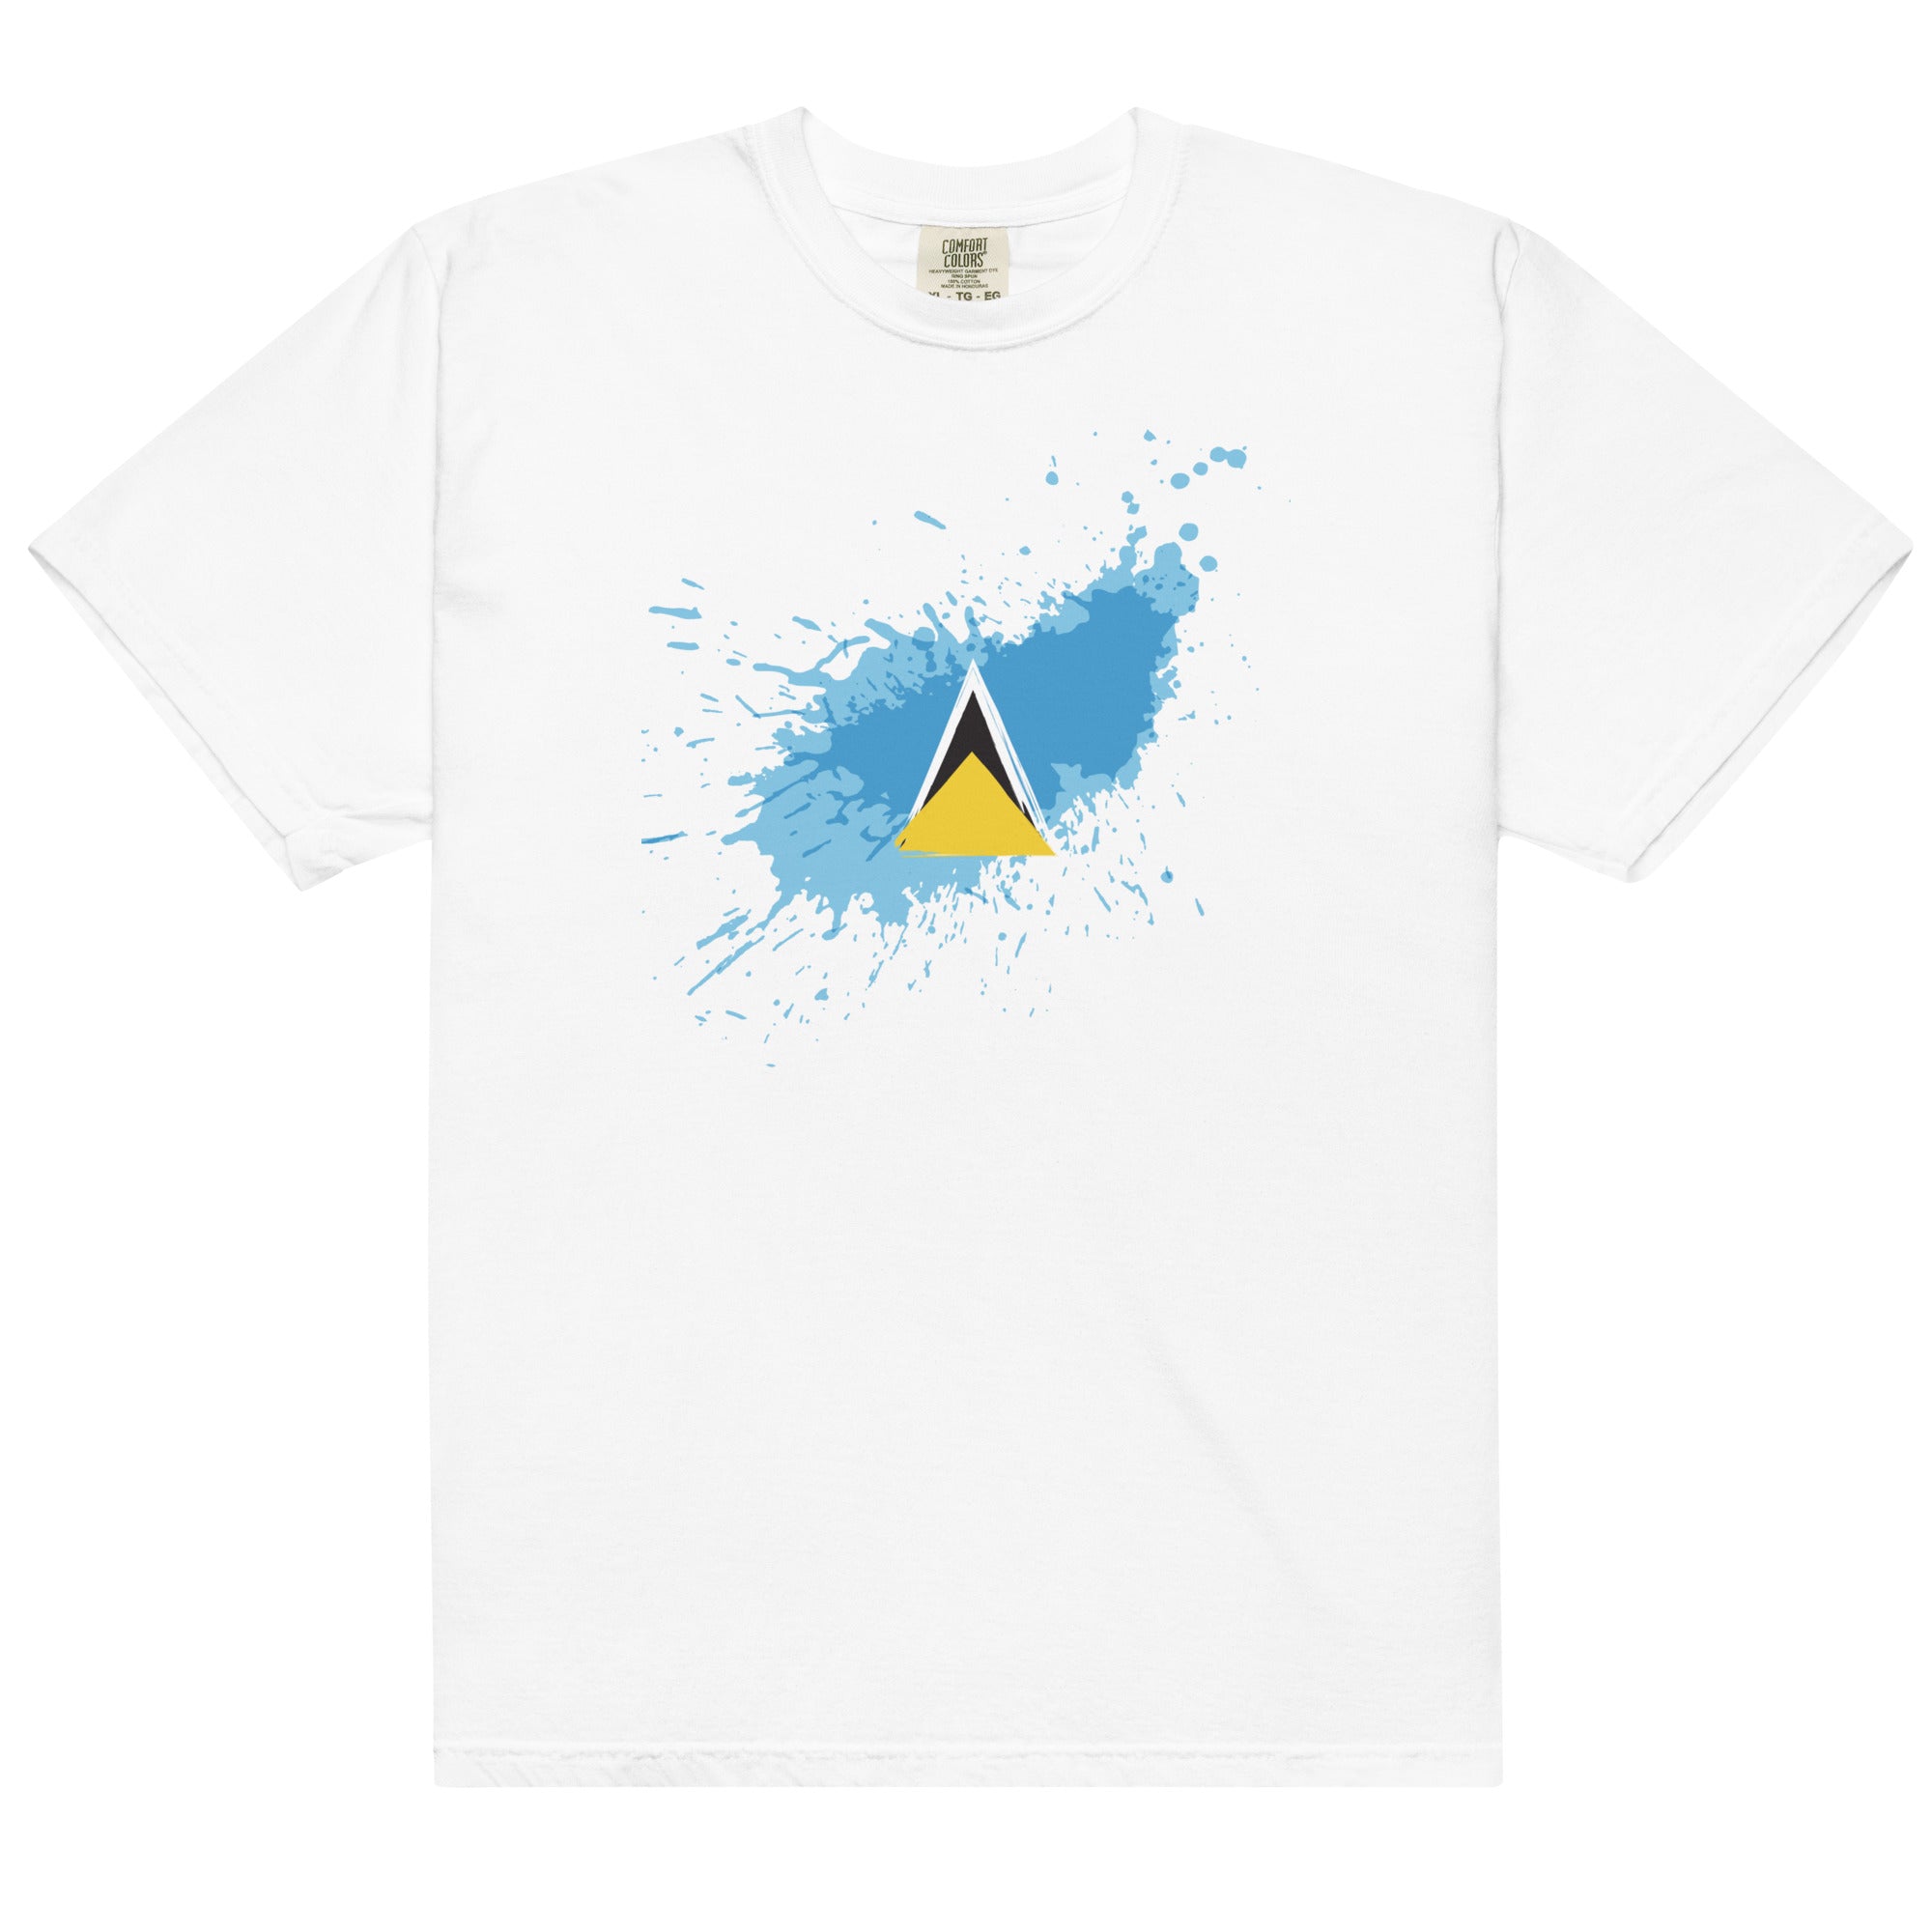 St Lucia Clothing Designs - Properttees